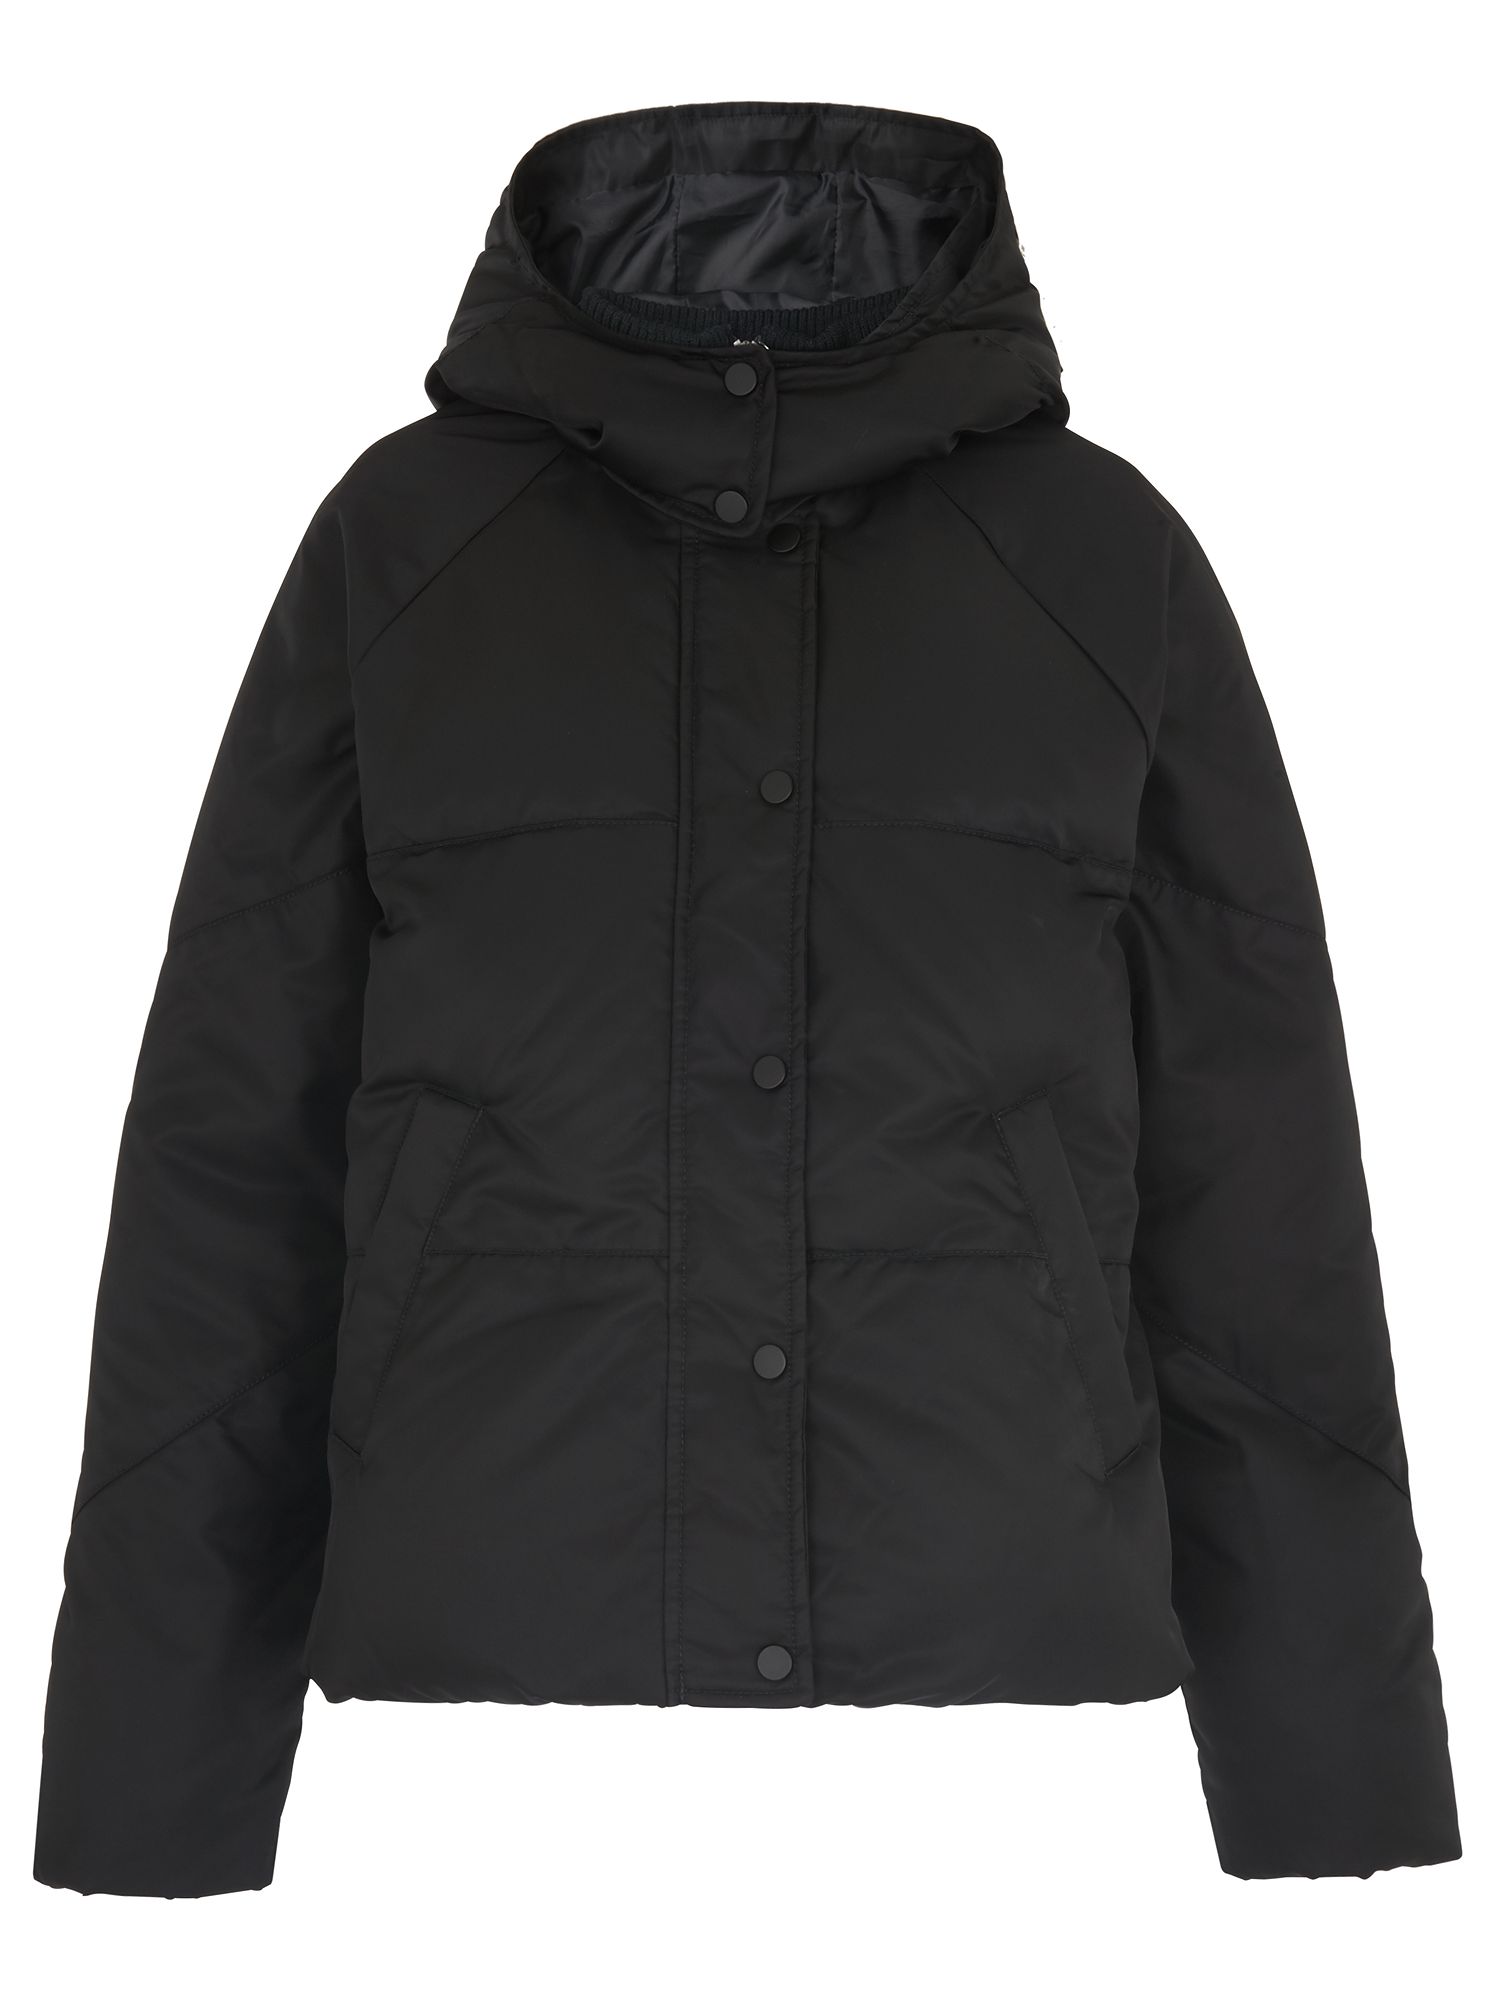 Whistles Iva Casual Puffer Jacket, Black